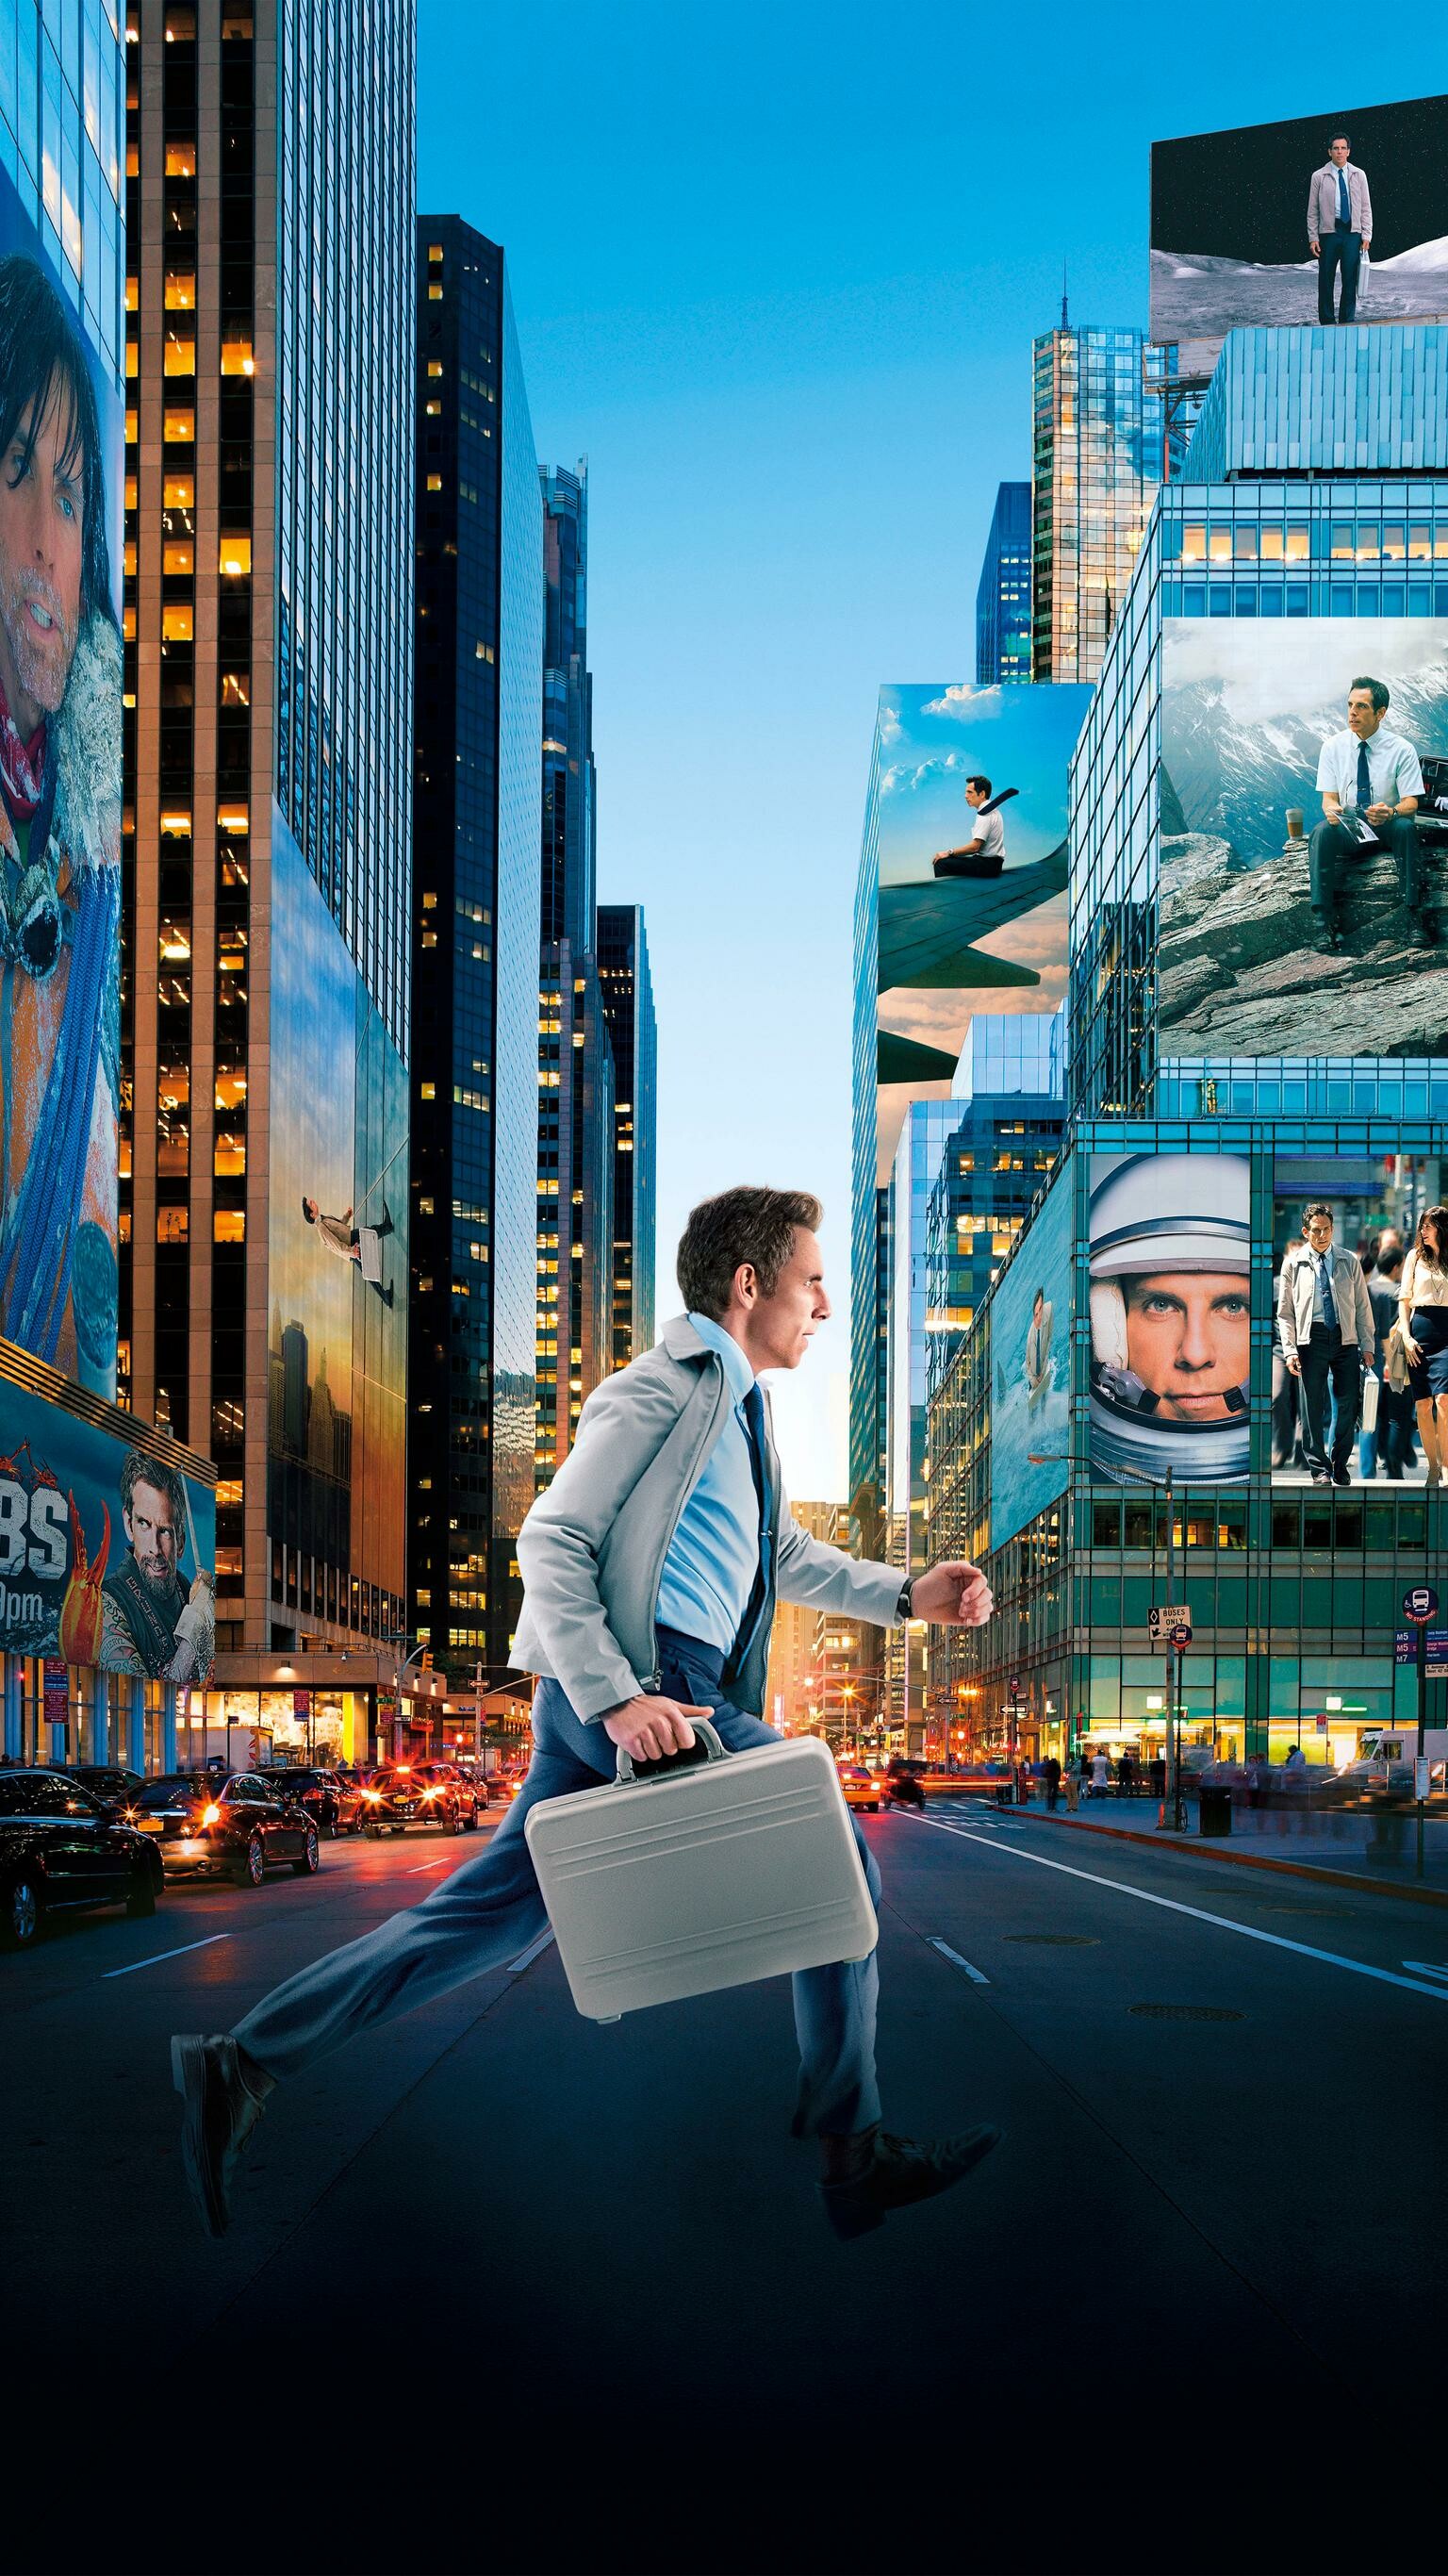 The Secret Life of Walter Mitty: A negative assets manager at Life magazine living alone in New York City, Movie, 2013. 1540x2740 HD Background.